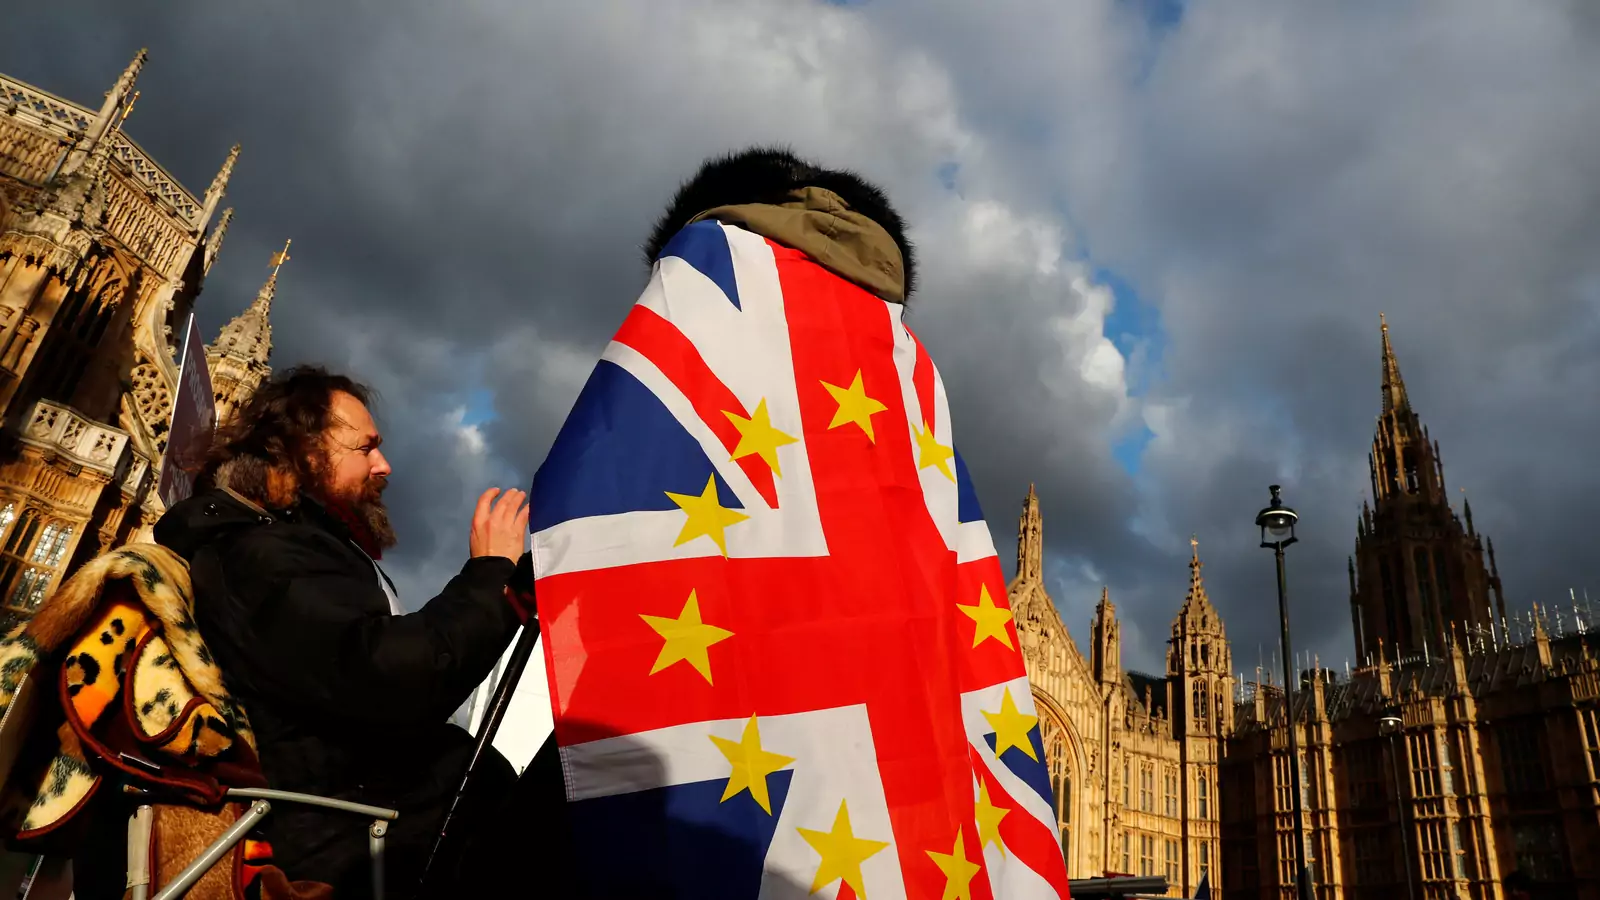 An anti-Brexit demonstrator wears a Union flag decorated with the stars of the EU flag opposite the Houses of Parliament in London, Britain.